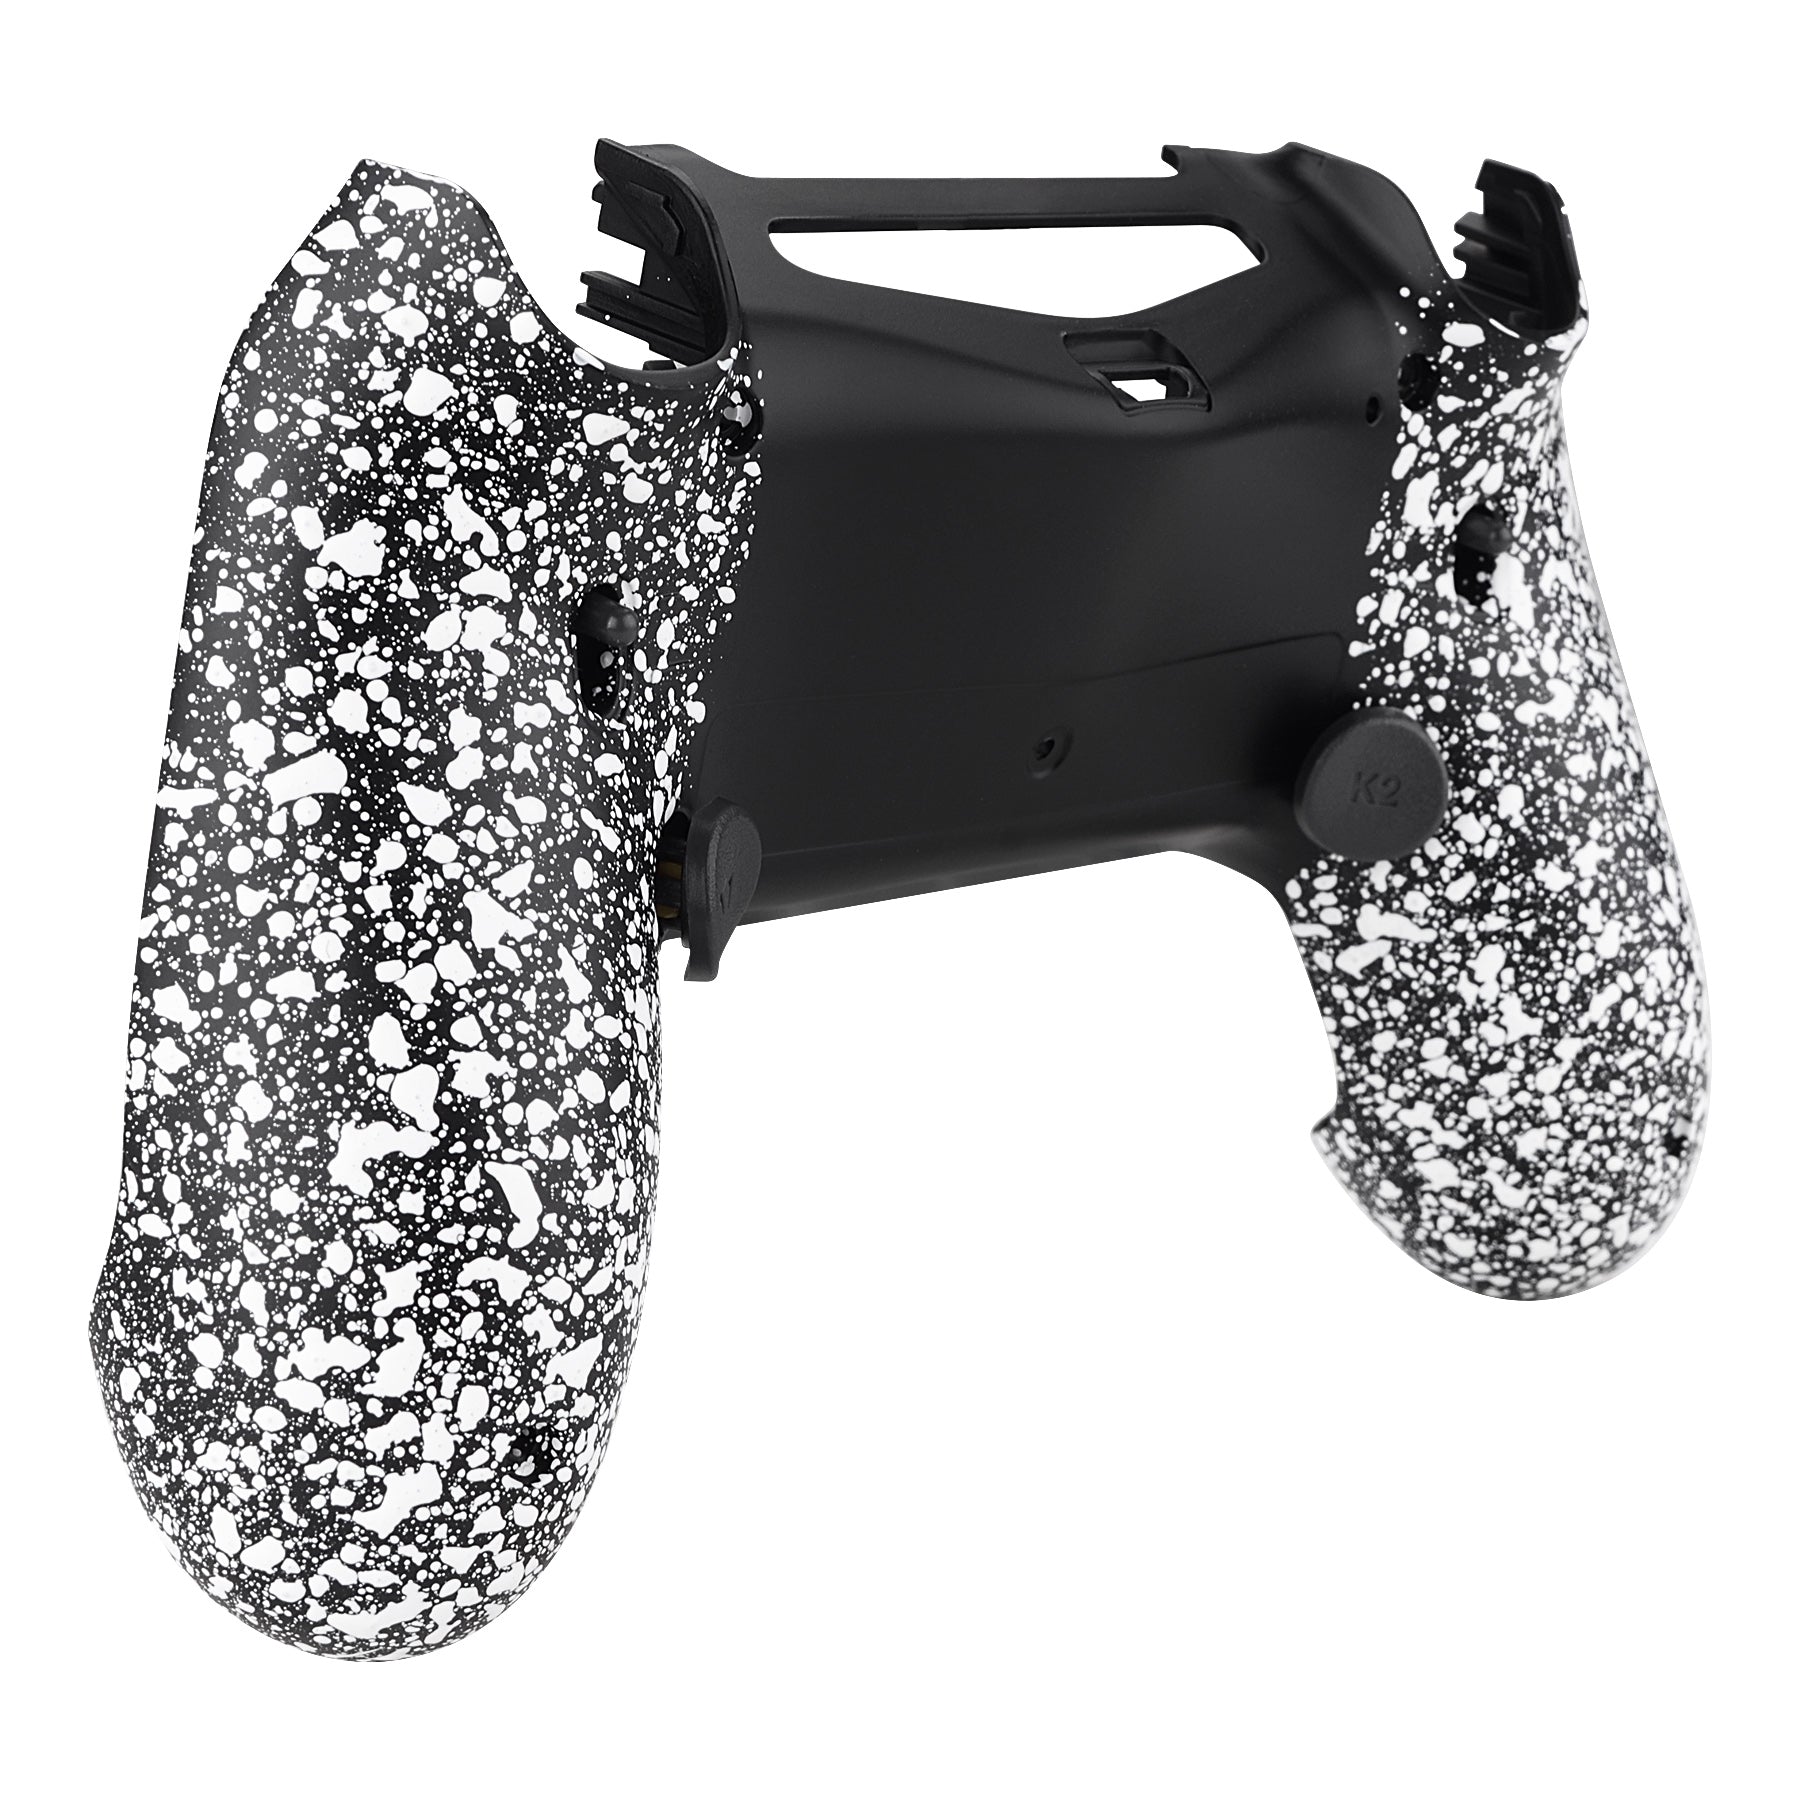 eXtremeRate Textured White Dawn CUH-ZCT2 ps4 Back – & Controller JDM 040/050/055 Board Trigger Kit Redesigned Lock PS4 Controller, Trigger for 2.0 Buttons Shell Stop FlashShot Back & Upgrade & Remap for